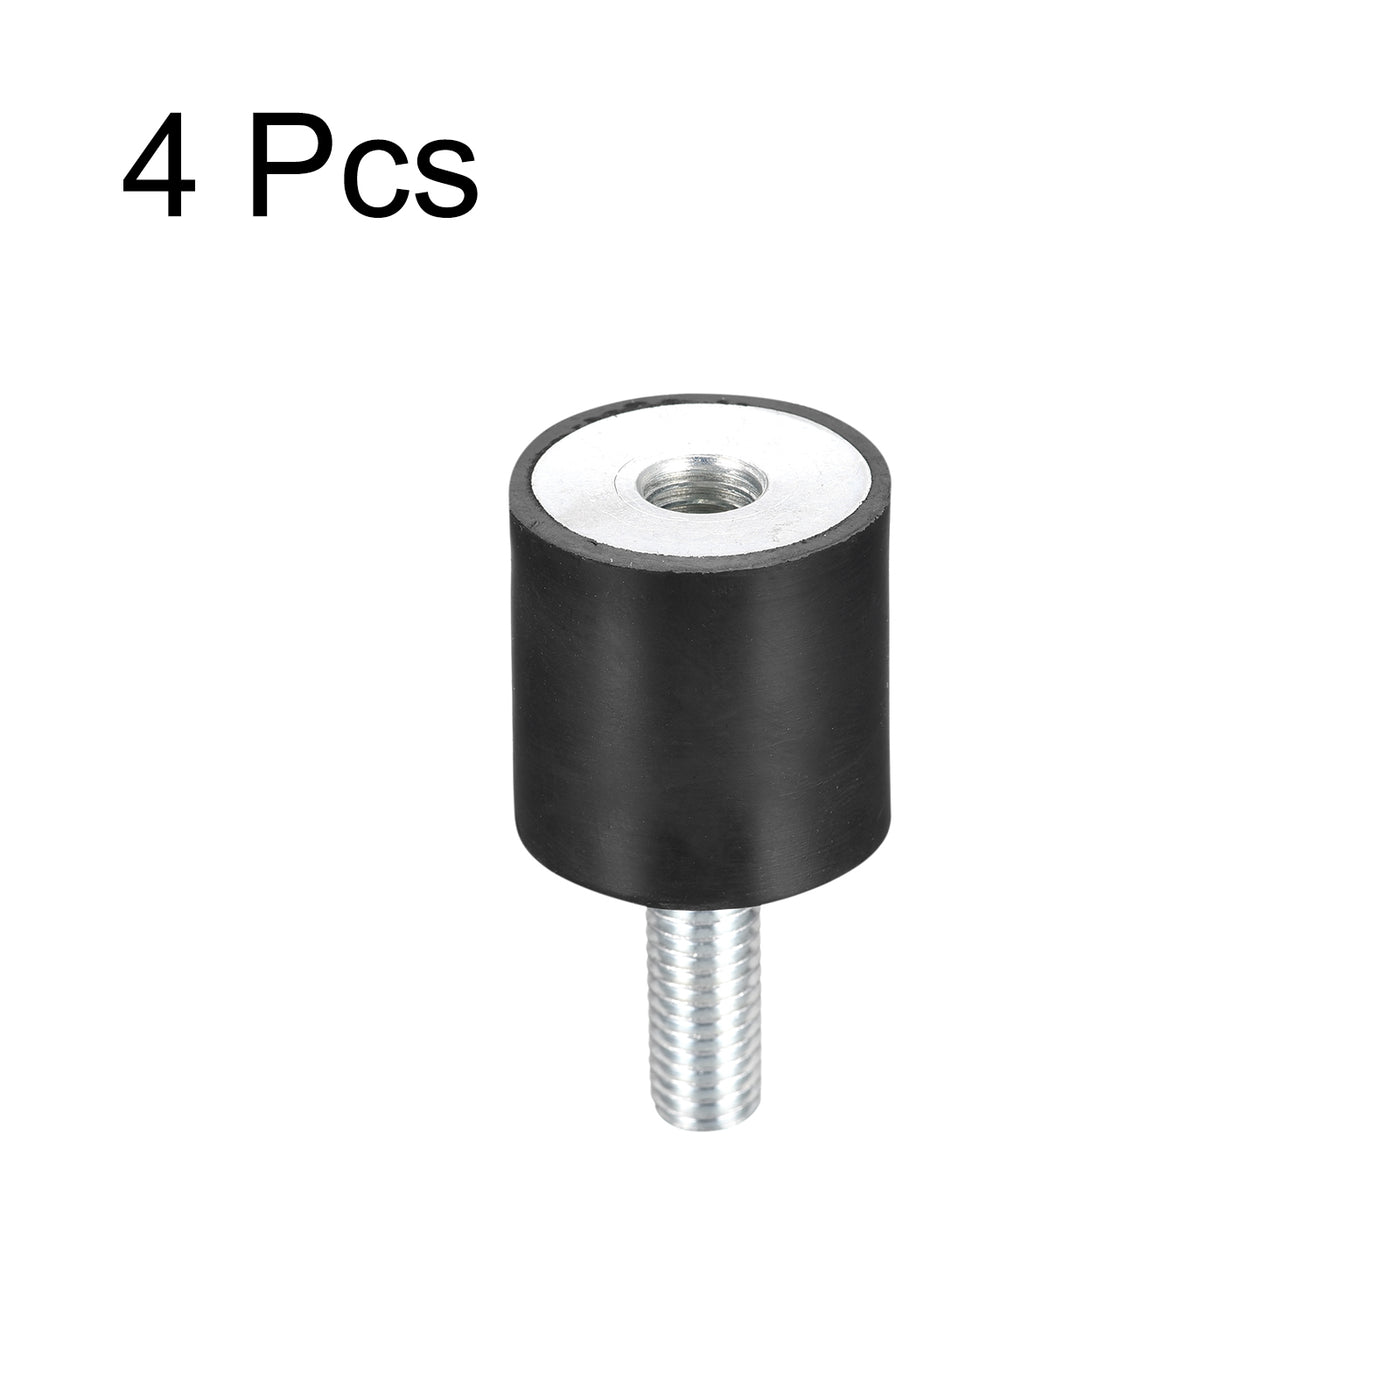 uxcell Uxcell Rubber Mounts 4pcs M8x23mm Vibration Isolator Shock Absorber D25mmxH25mm